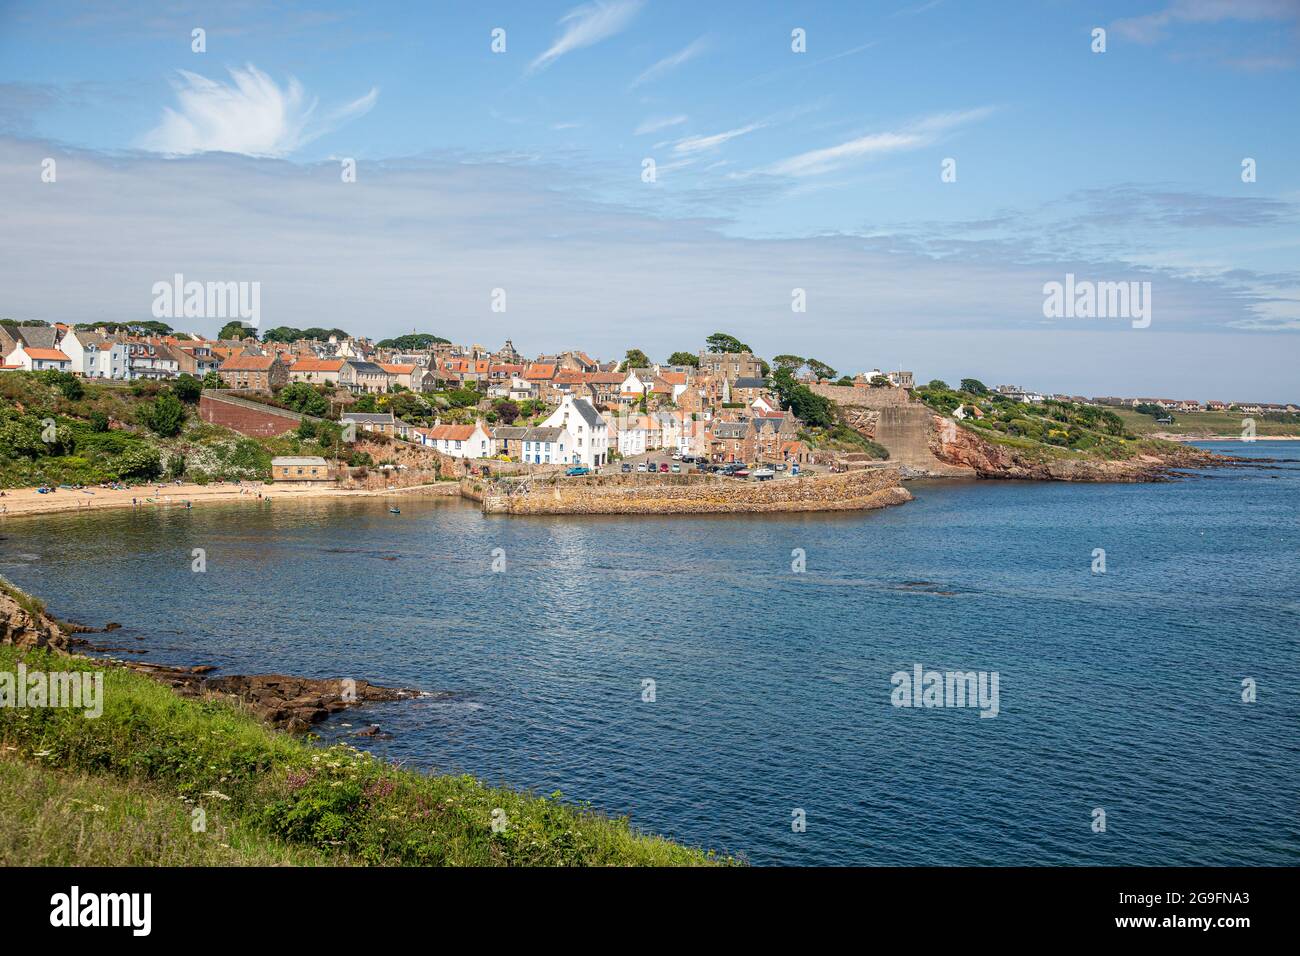 Crail village and harbour, East Neuk of Fife, Scotland Stock Photo